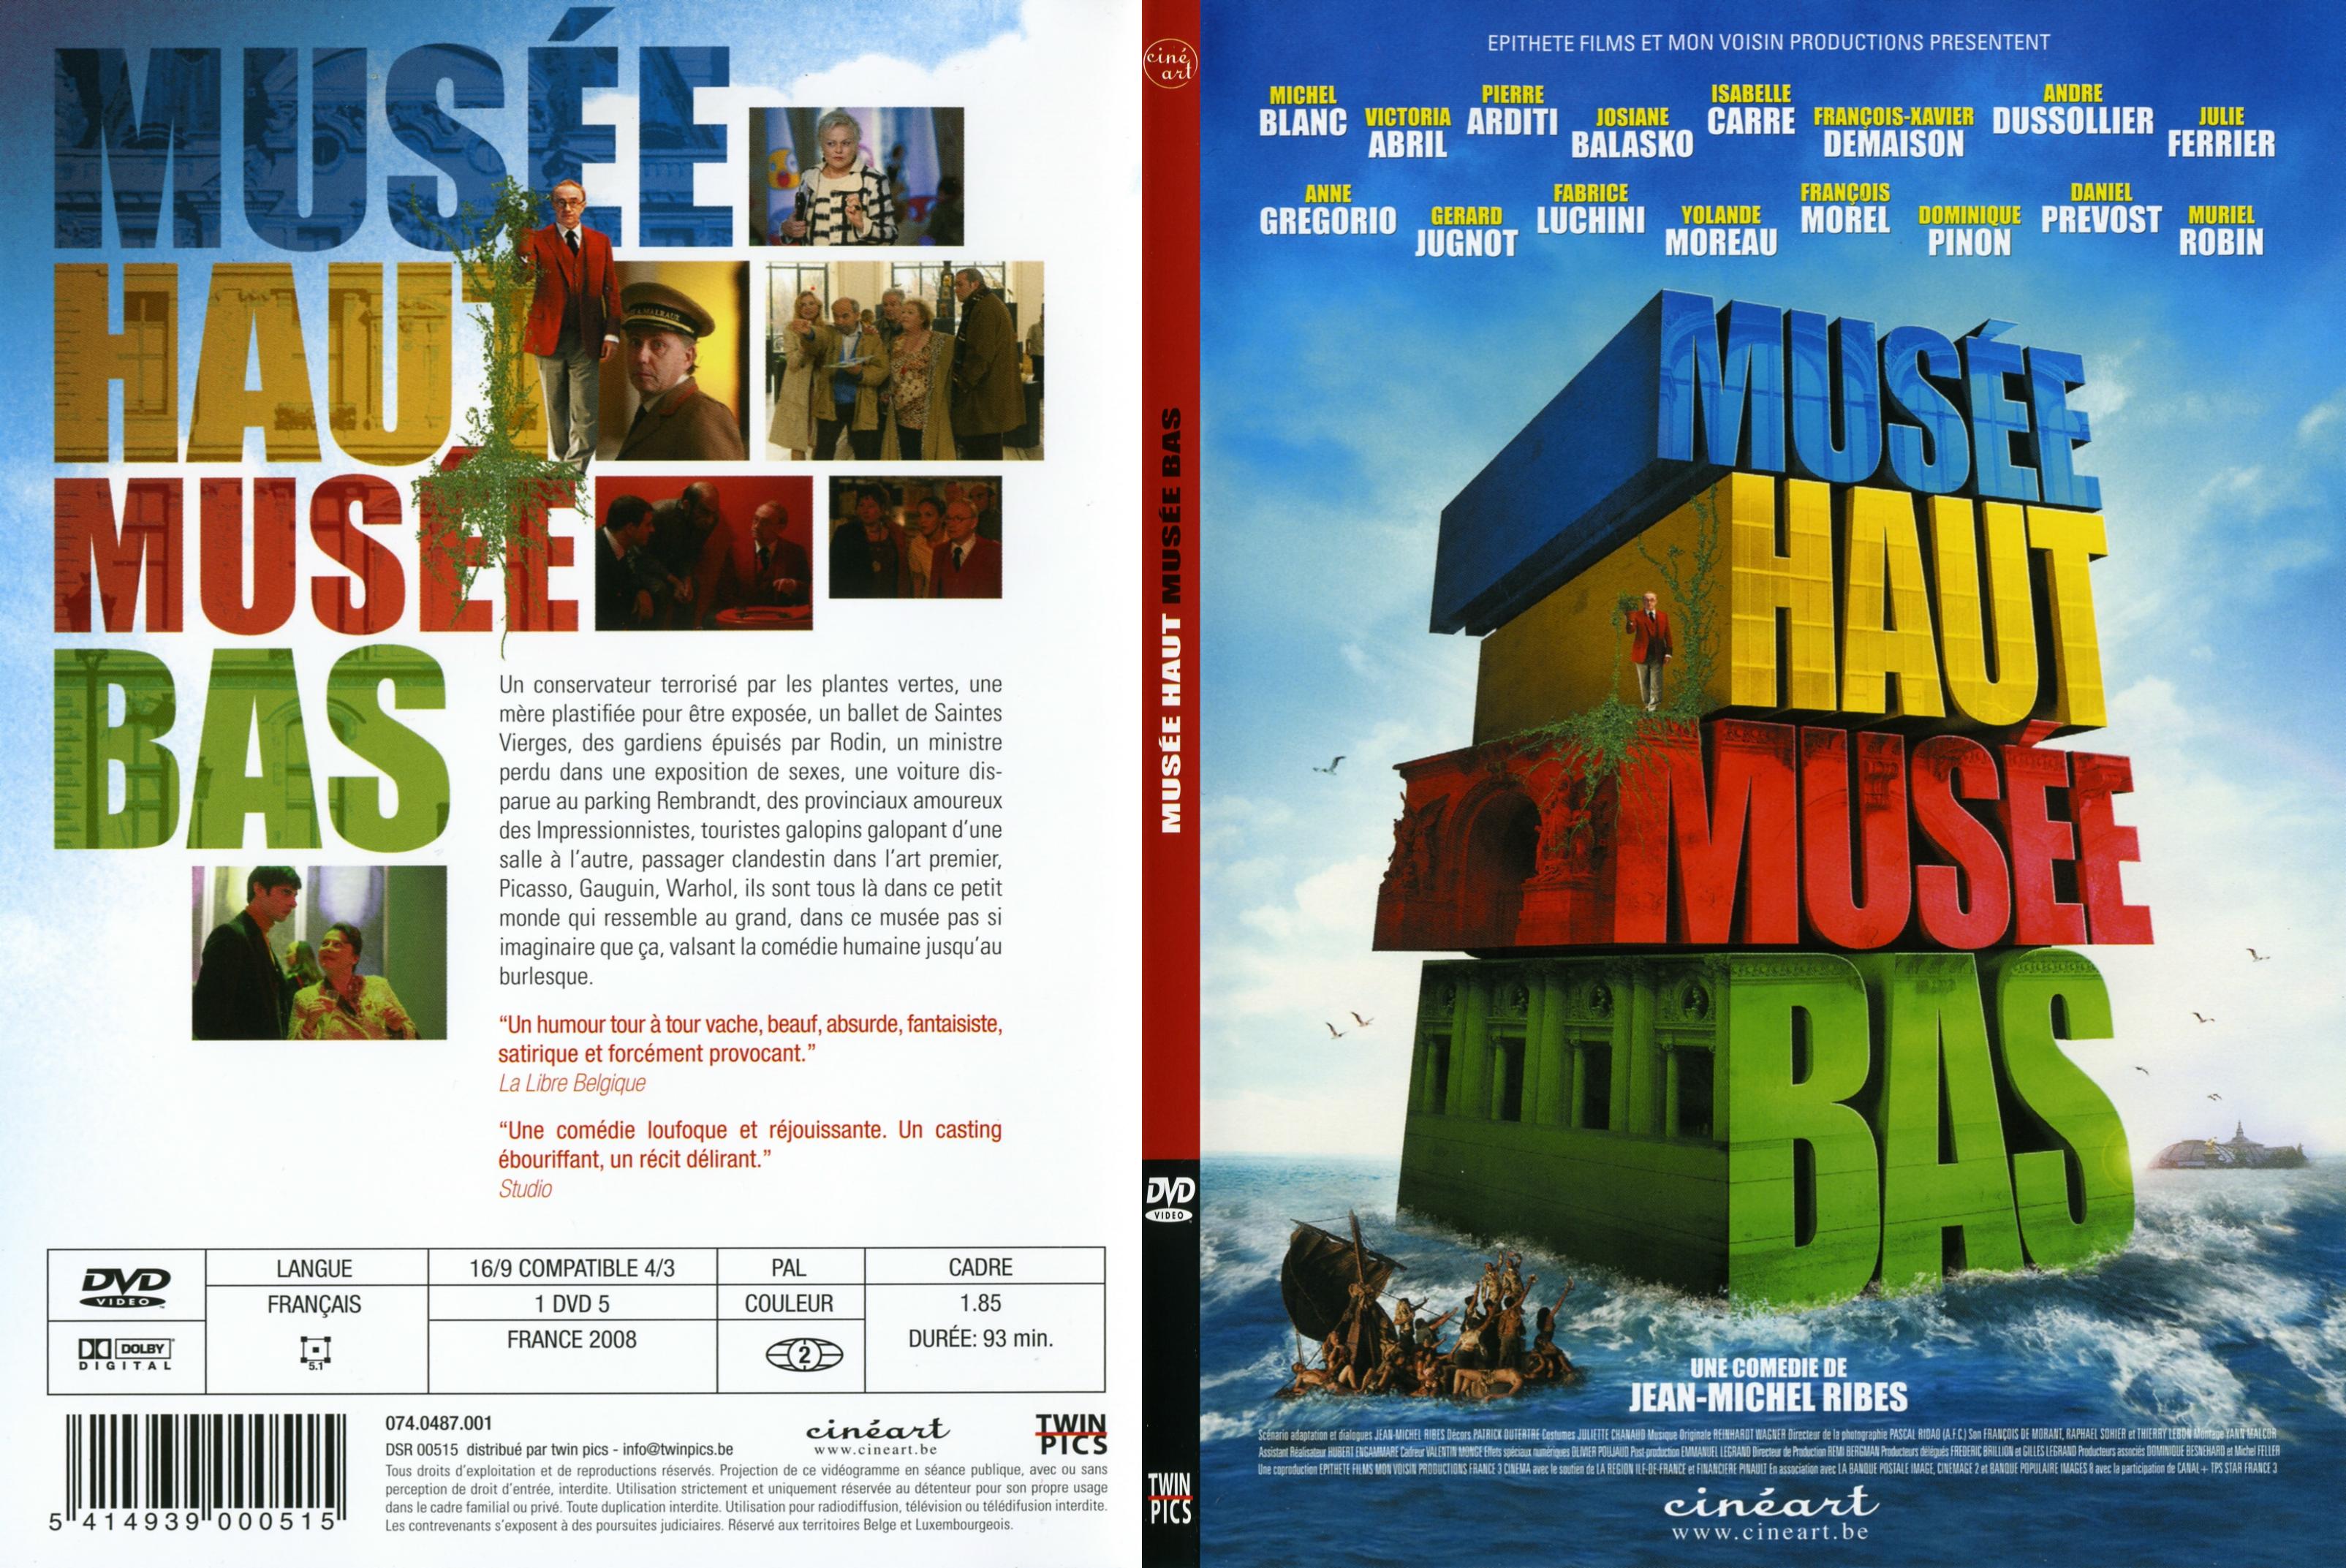 Jaquette DVD Musee haut musee bas - SLIM